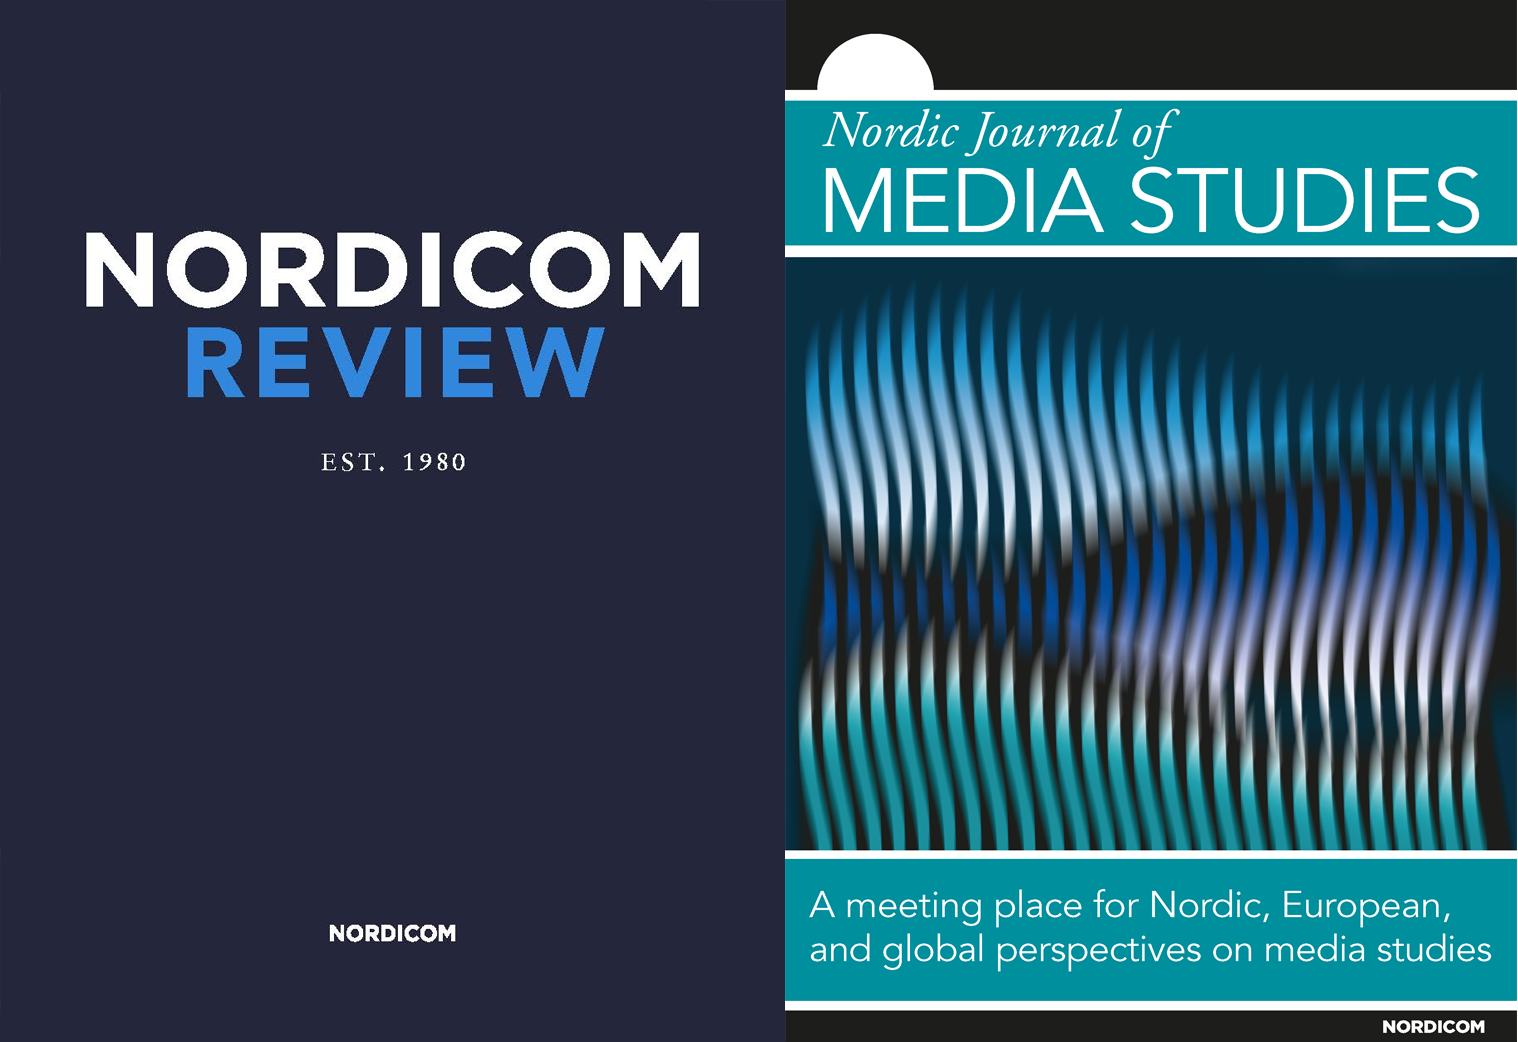 The covers of Nordicom Review and Nordic Journal of Media Studies.